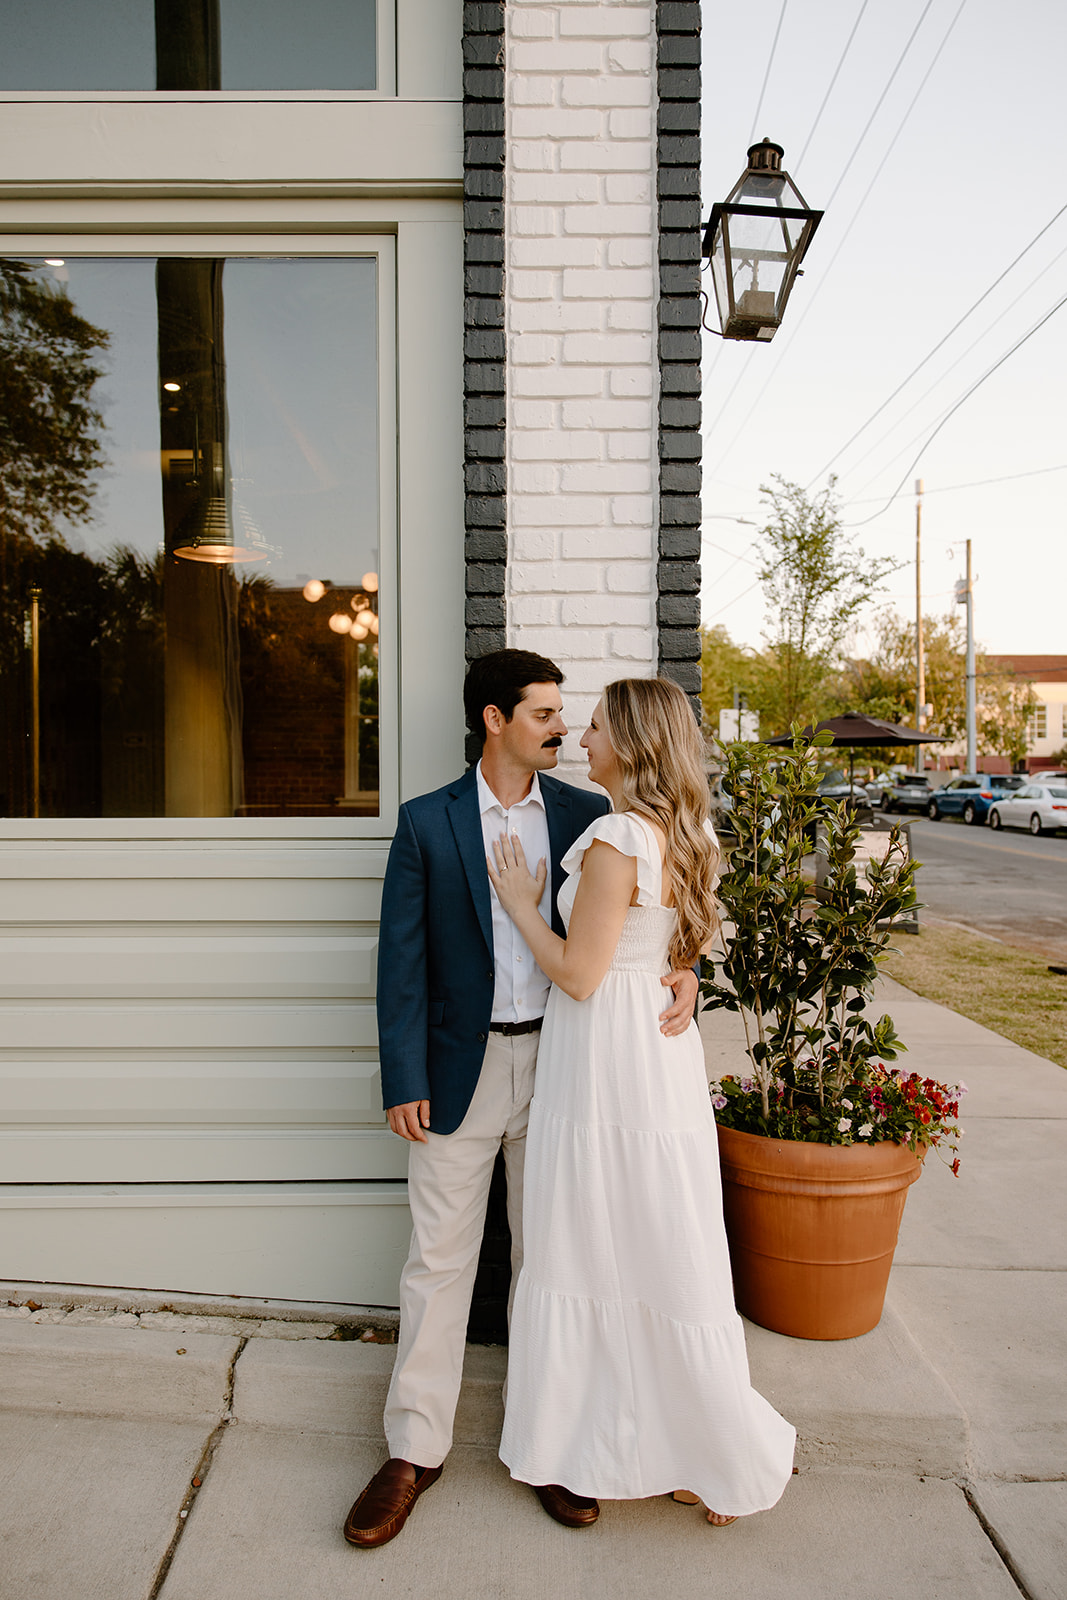 Elegant and timeless engagement pictures.